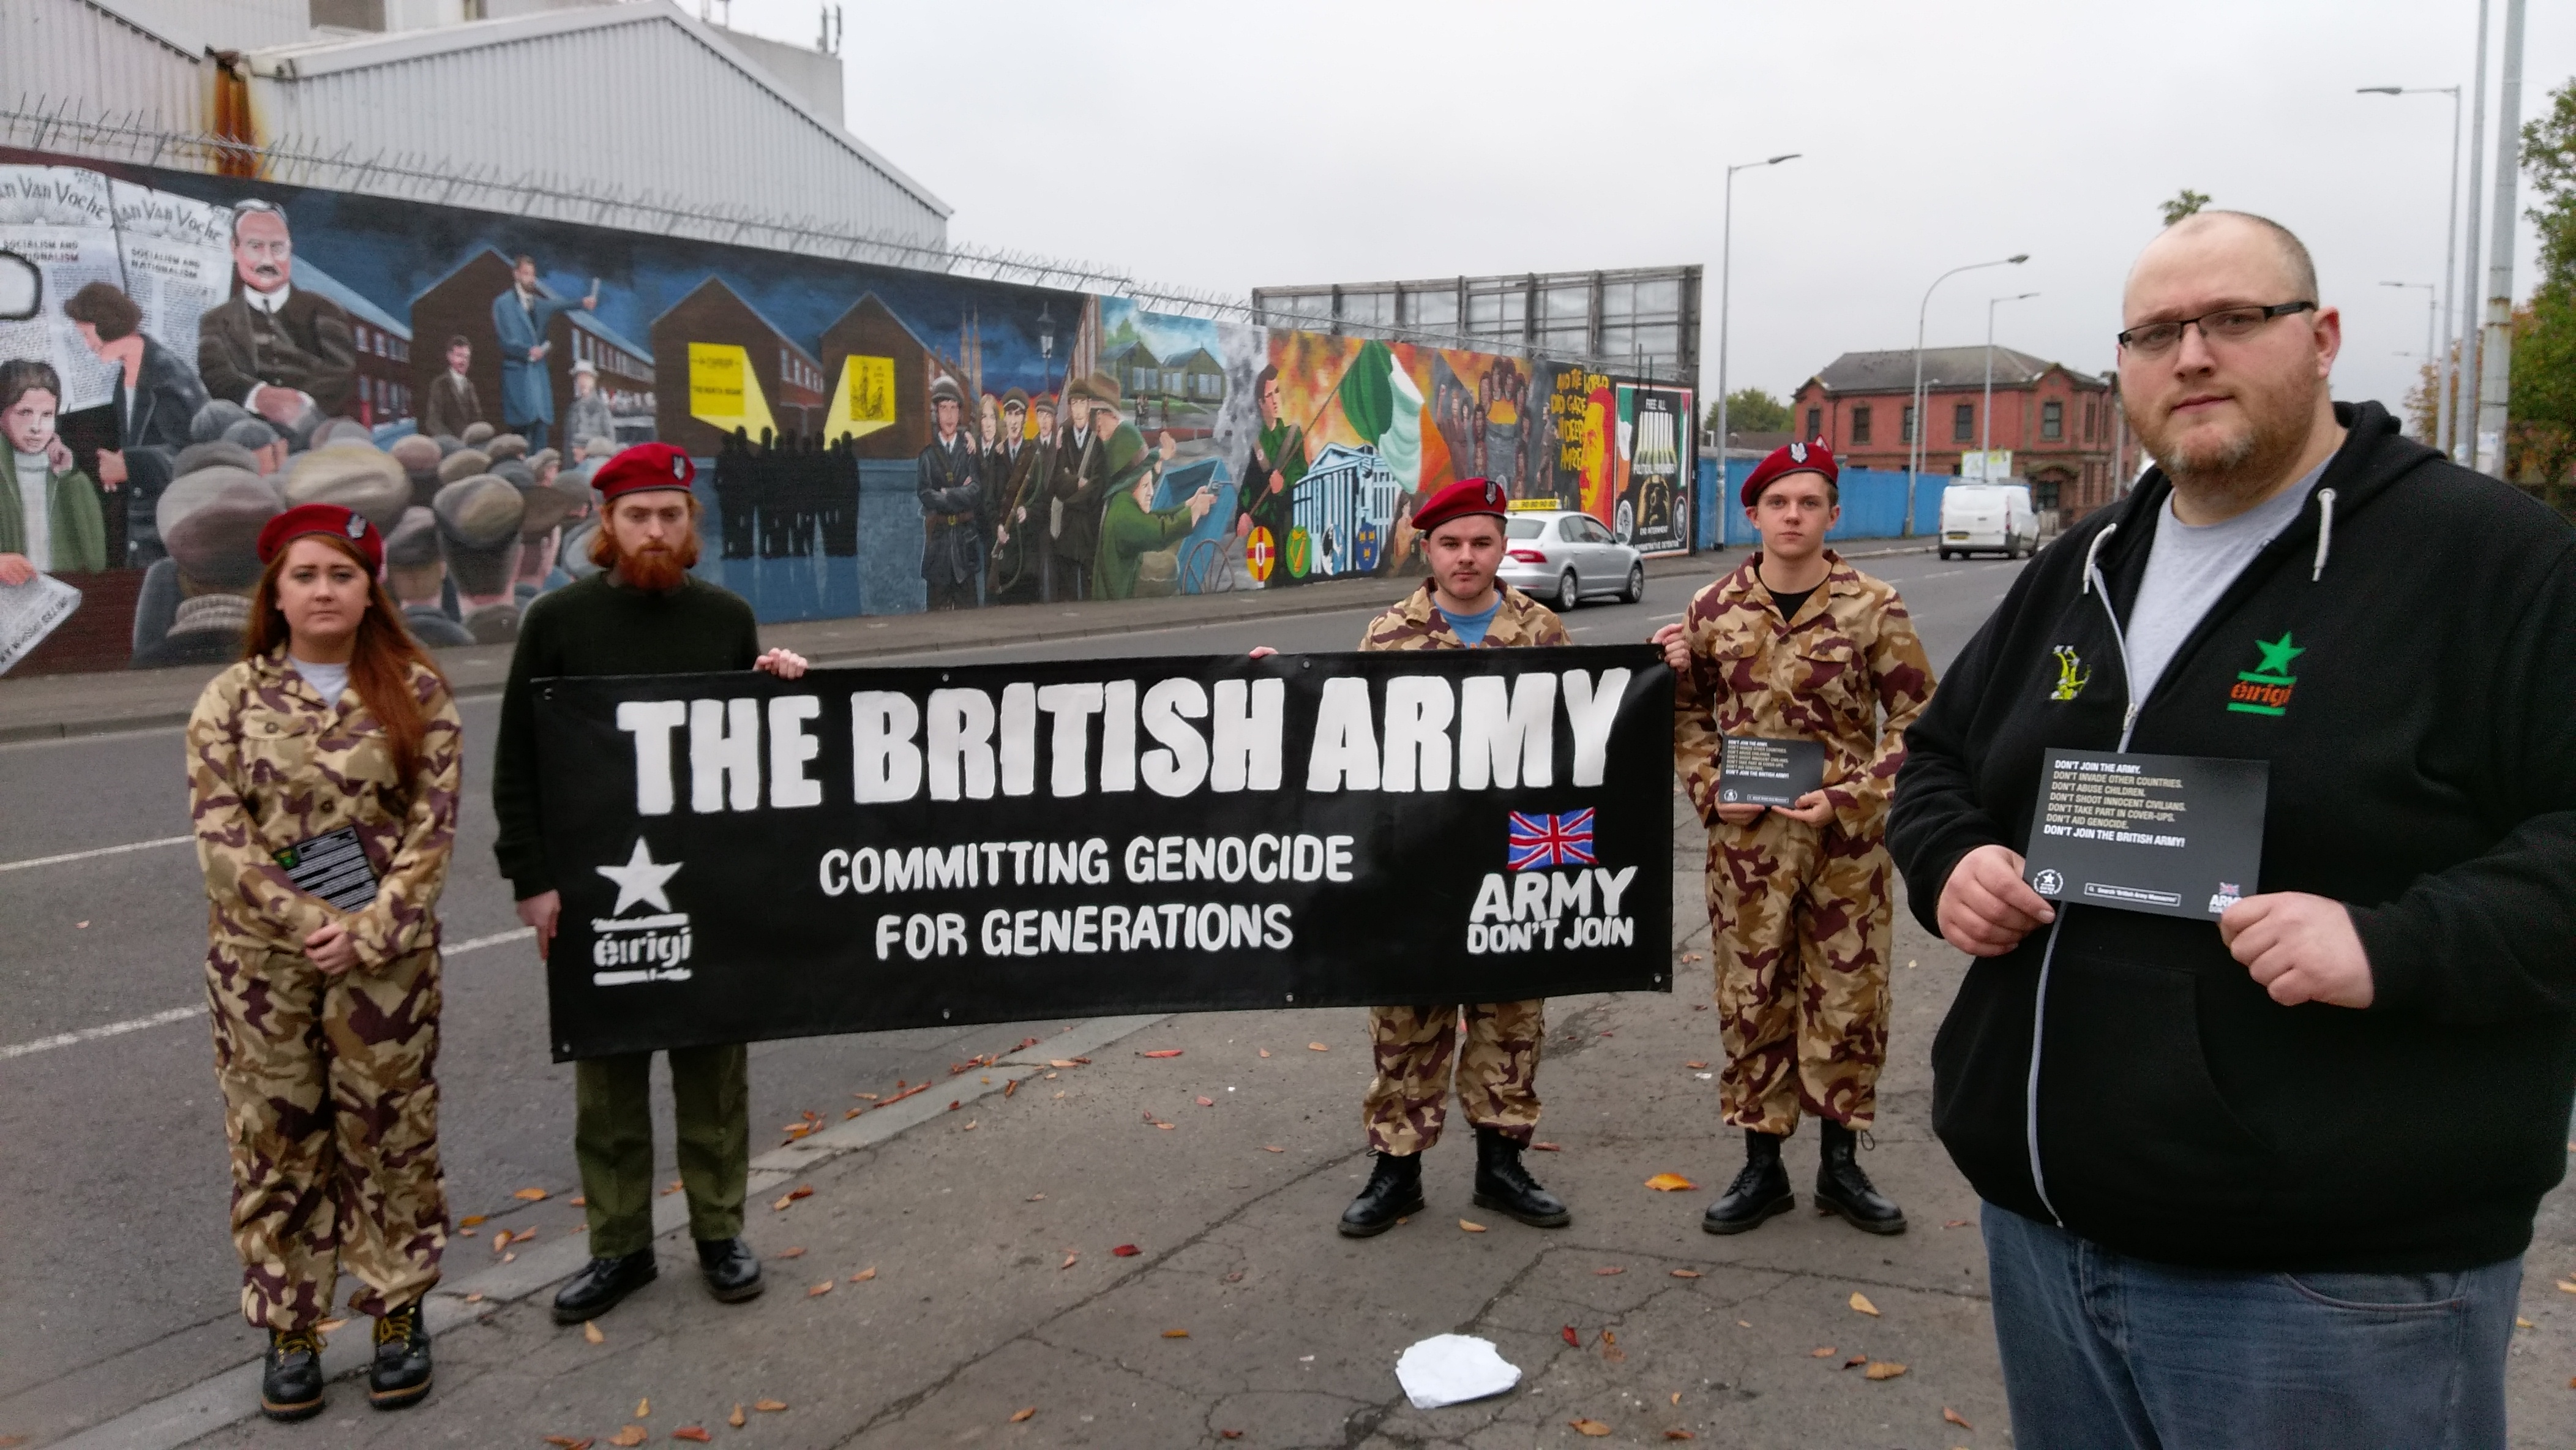 pc3b3l-torbc3b3id-on-extreme-right-at-recent-event-to-highlight-british-army-recruitment-in-ireland.jpg